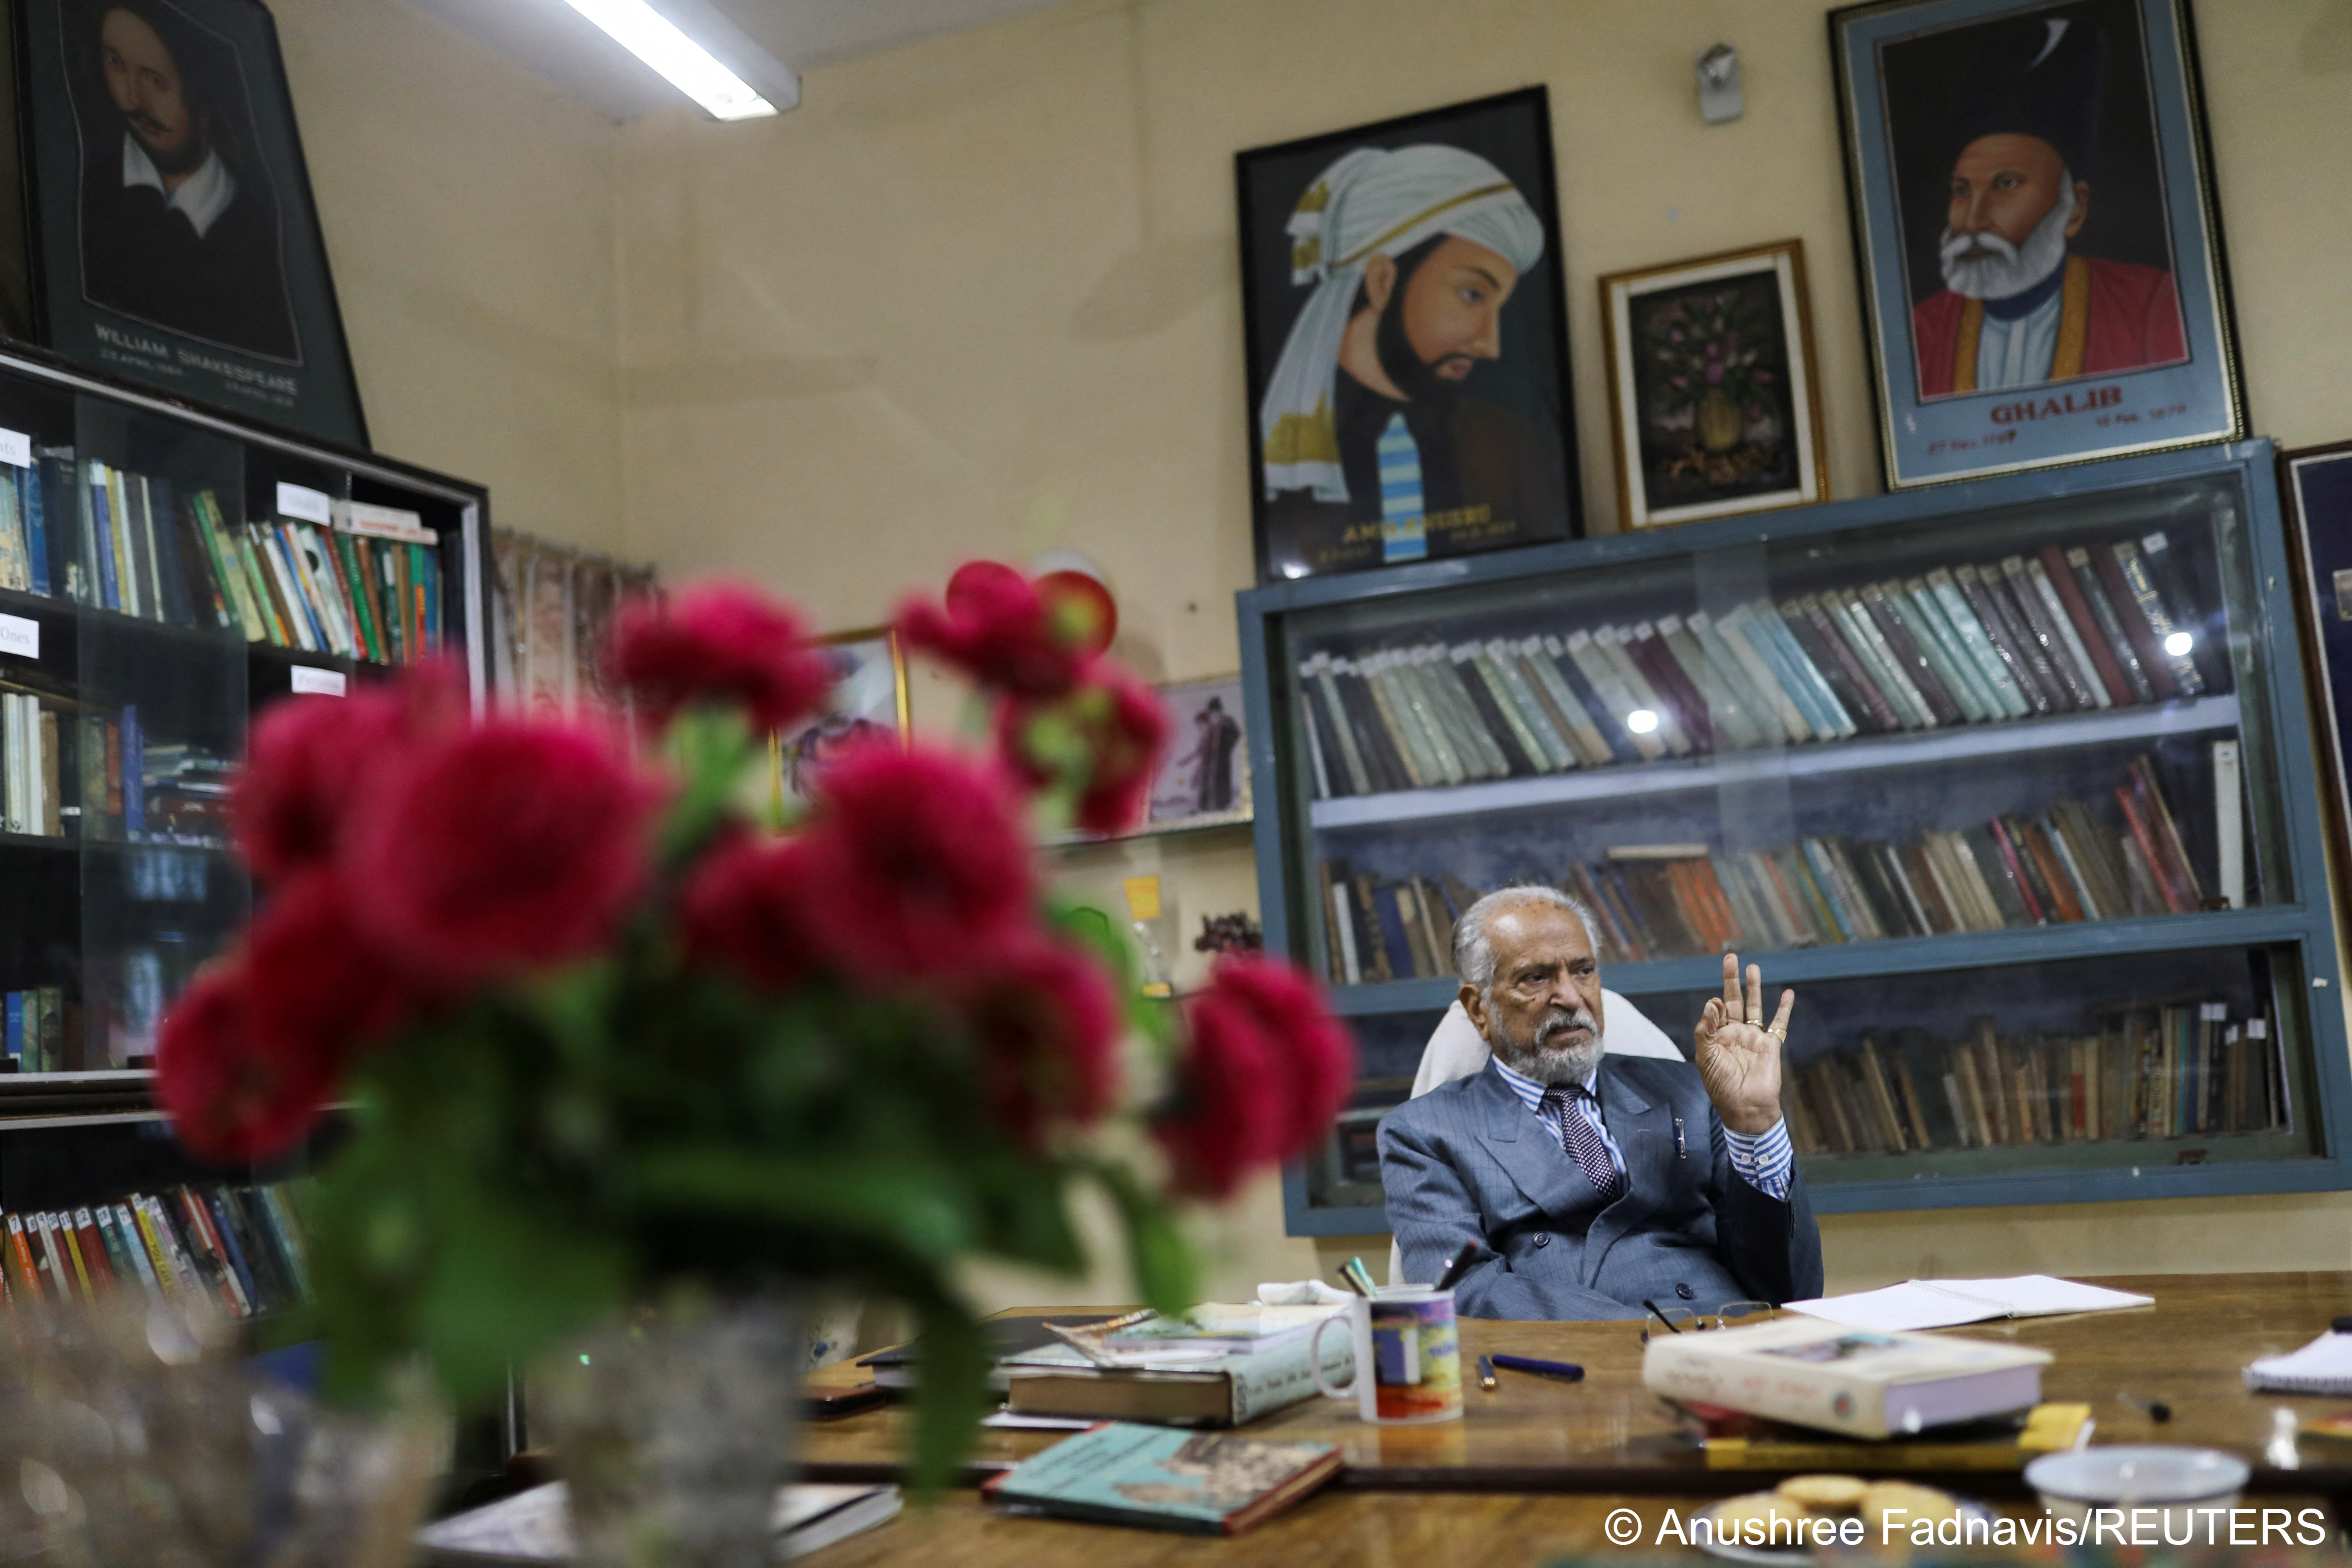 Z. Hassan, President of the trust that runs the Shahi Eidgah mosque, speaks during an interaction with Reuters at a library at his residence, in Mathura, in the northern state of Uttar Pradesh, India, 24 January 2022 (photo: Reuters/Anushree Fadnavis)